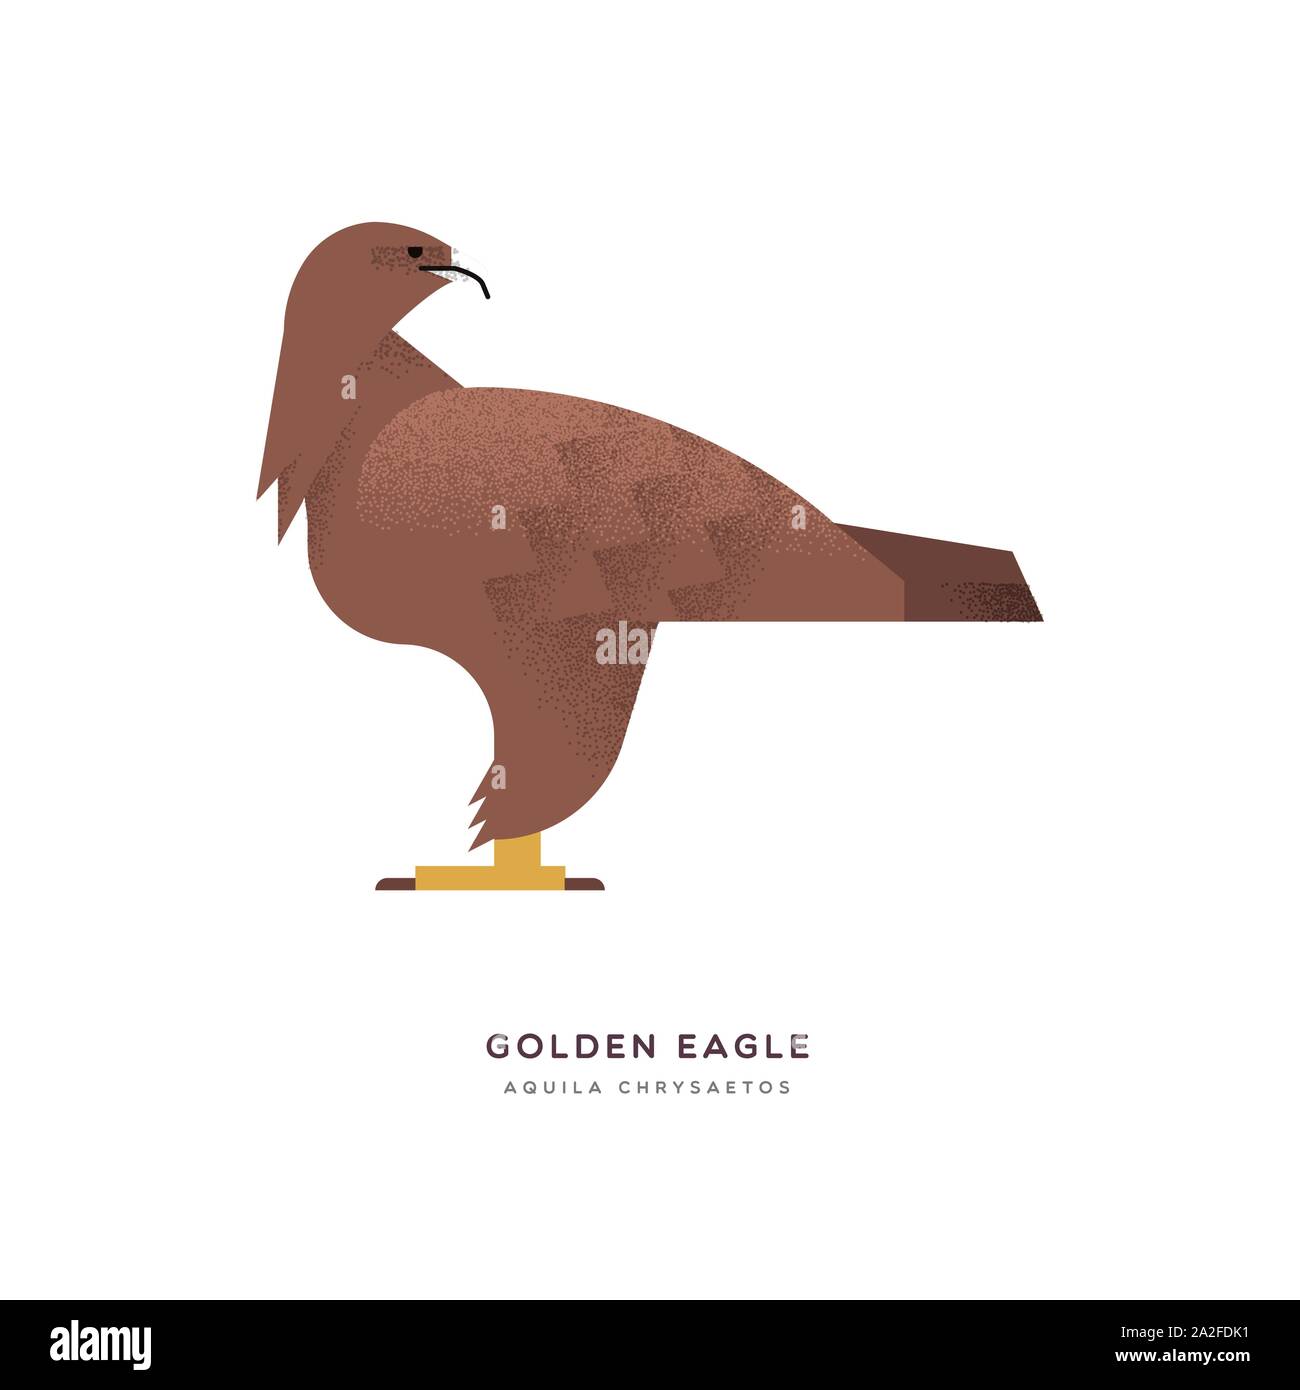 Golden eagle illustration on isolated white background, south america zoo bird animal concept. Educational wildlife design with fauna species name lab Stock Vector